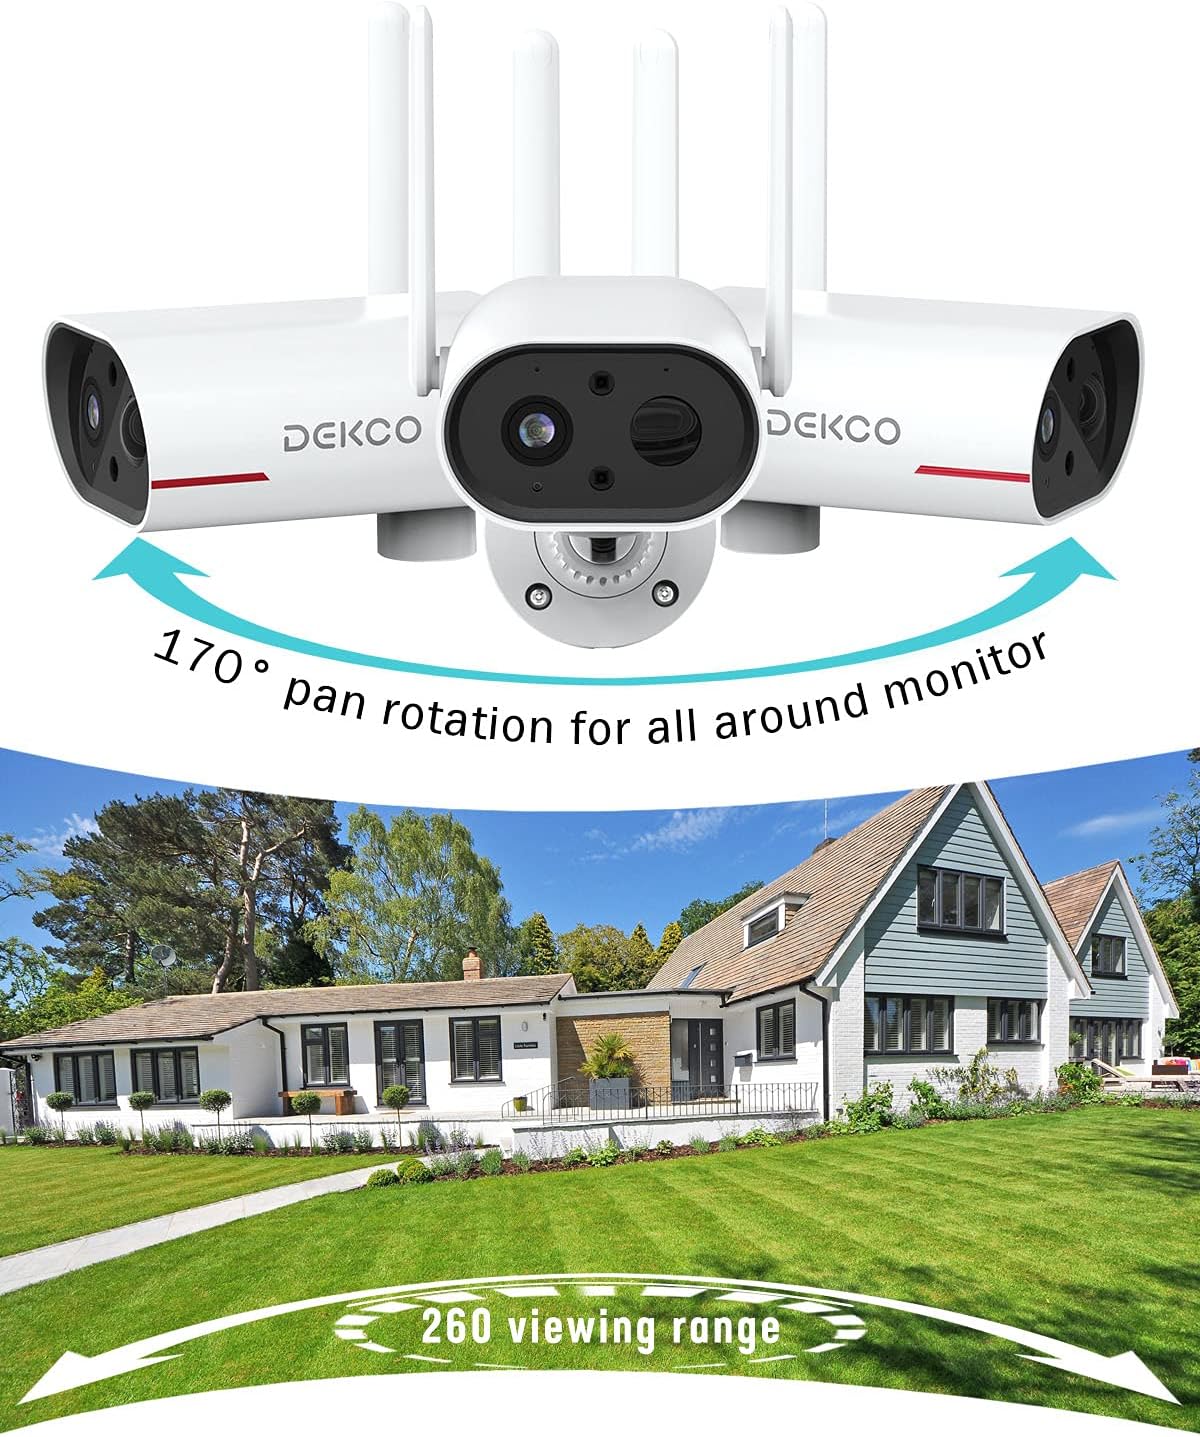 DEKCO Wireless Security Camera for Home Security 260° View Range Solar - $55